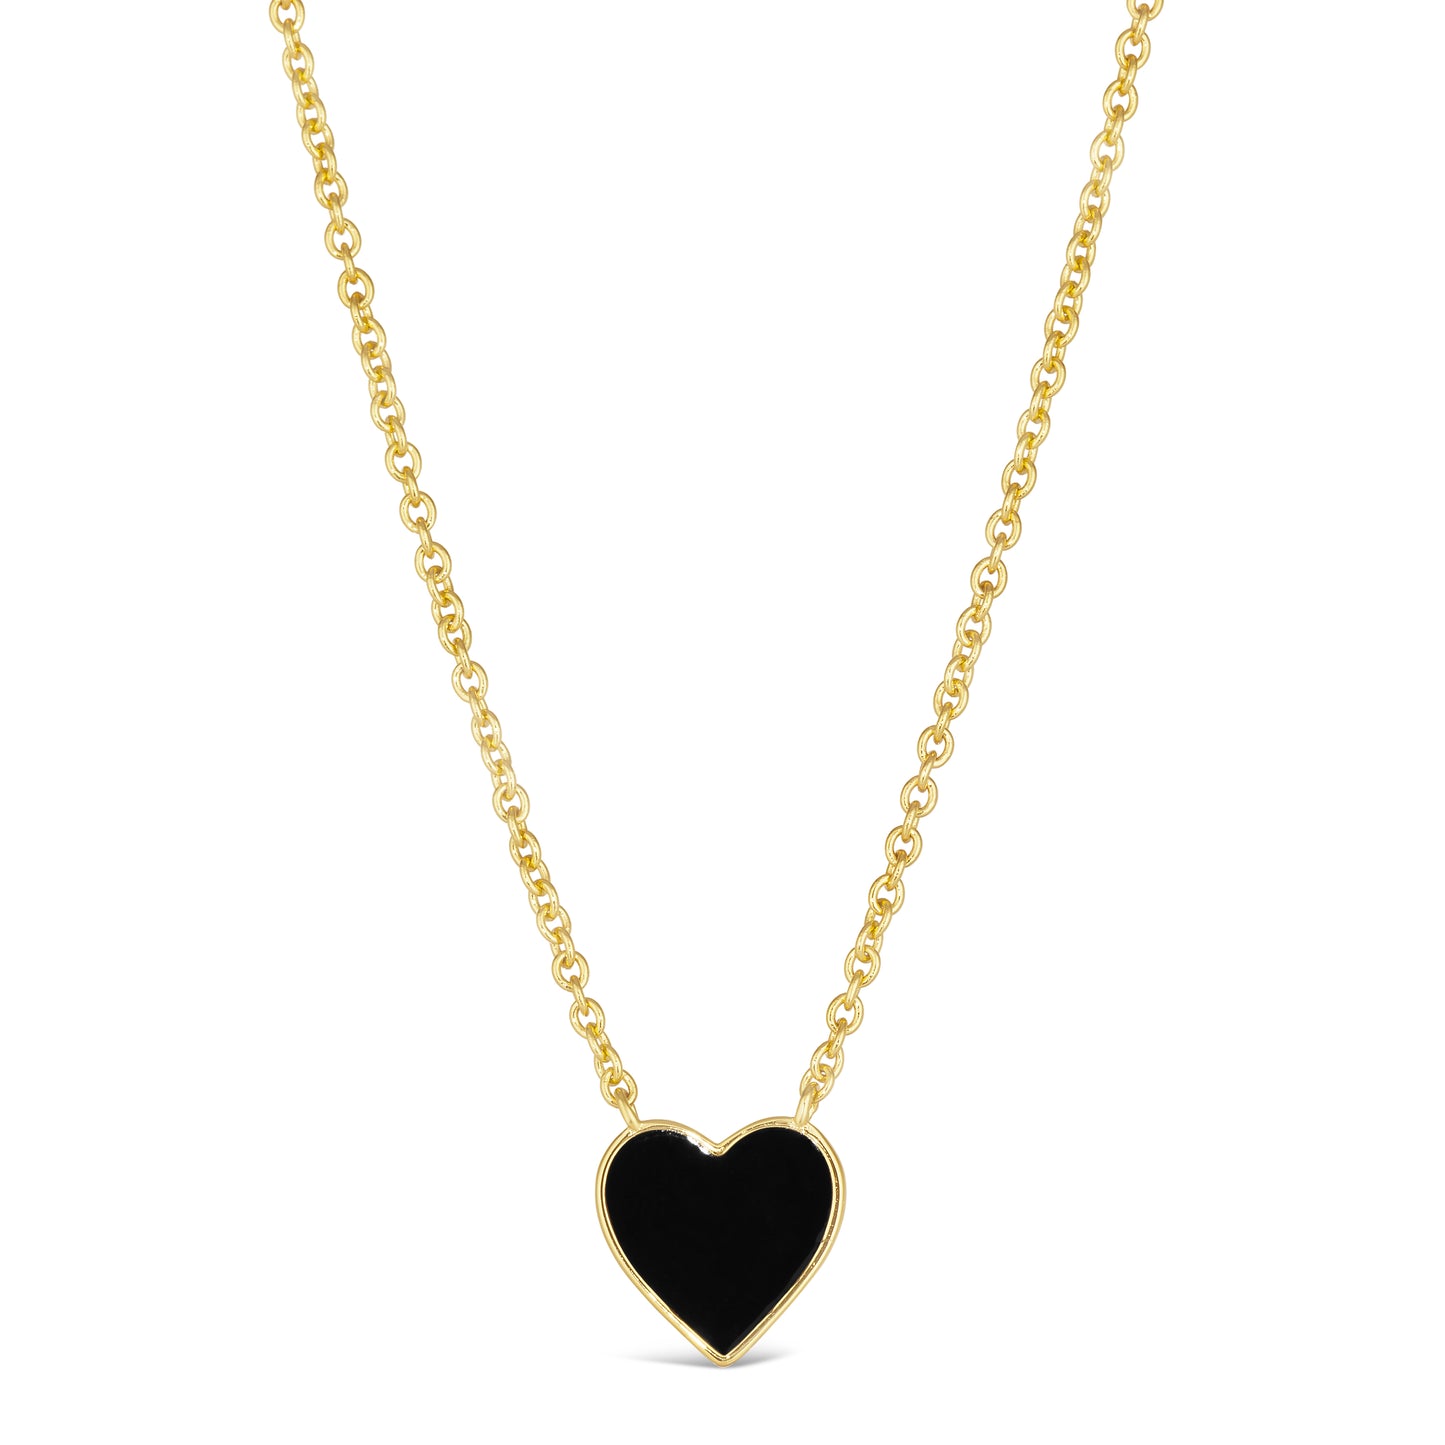 House of Cards 10 Enamel Heart Necklace - Anna Zuckerman Luxury Necklaces